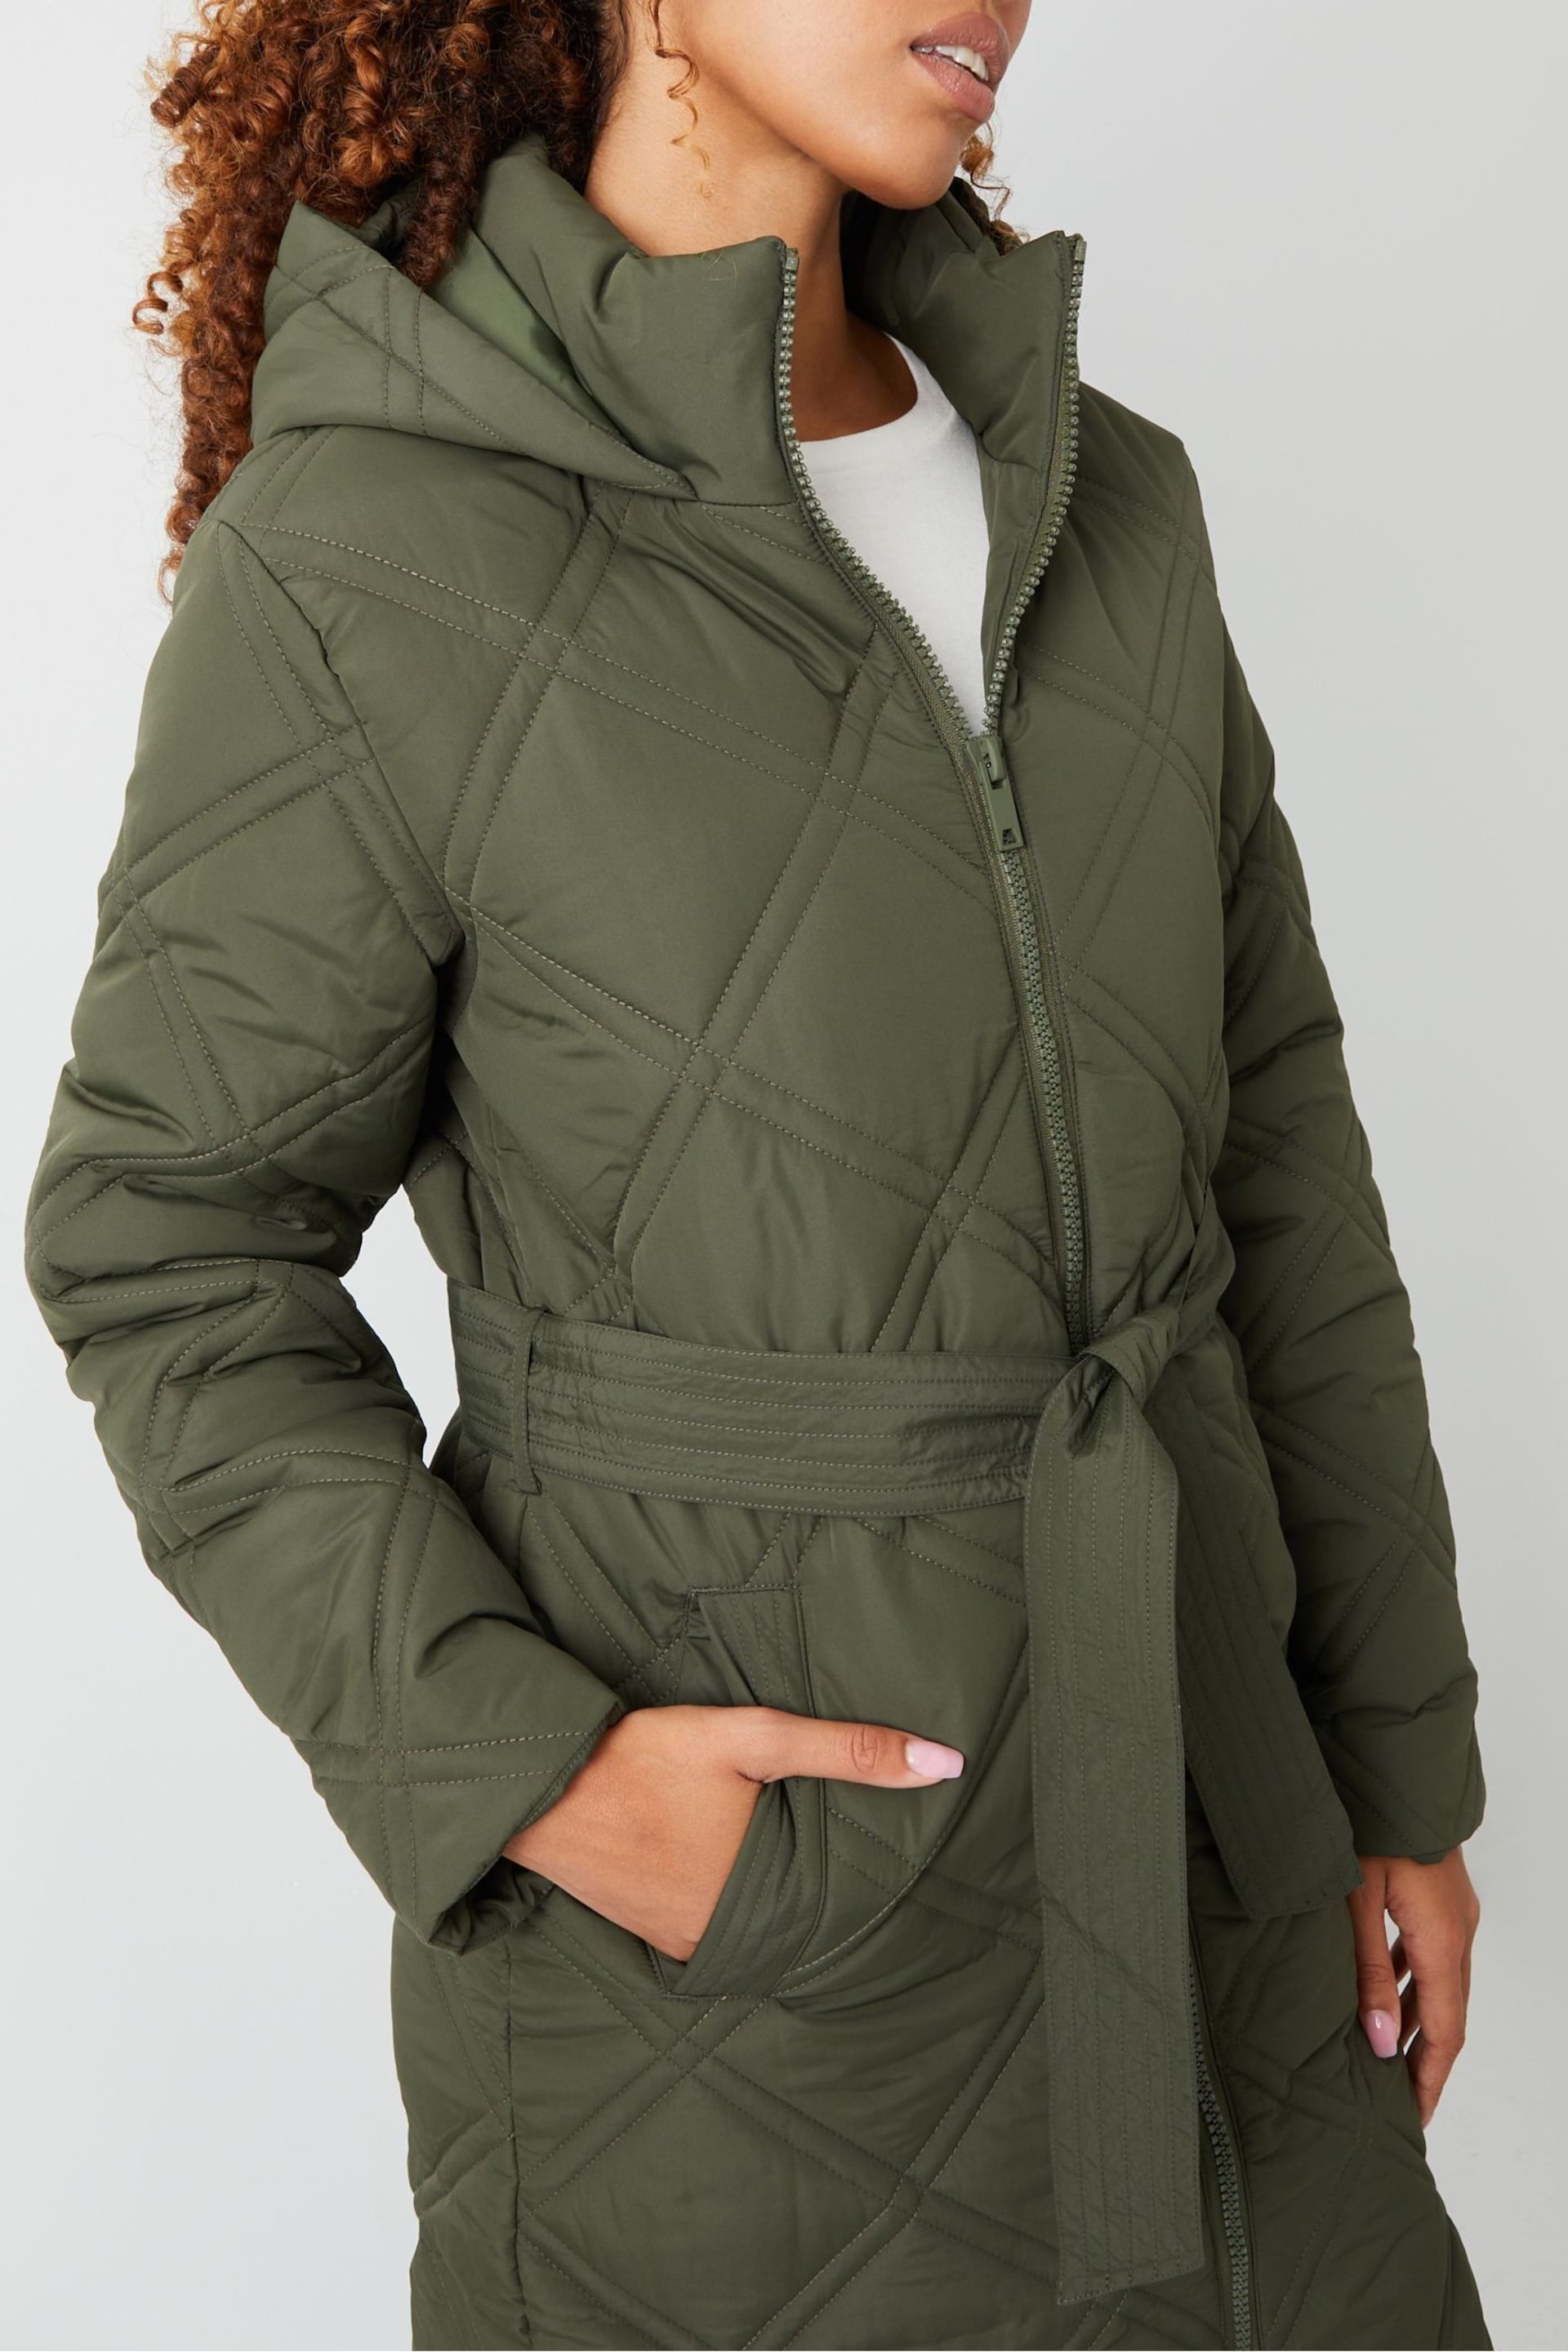 Threadbare Green Belted Diamond Quilted Padded Coat - Image 5 of 5